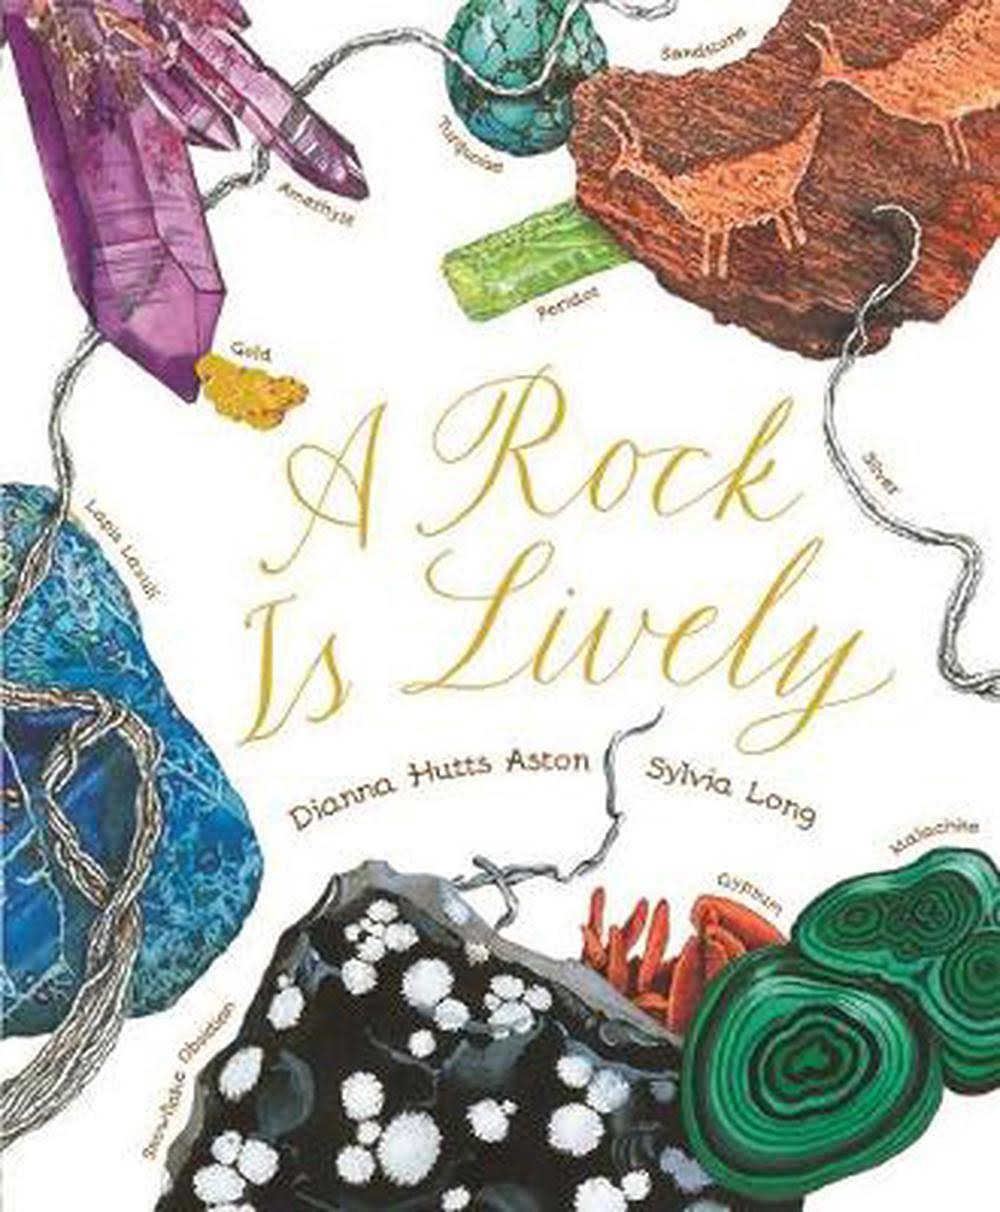 A Rock Is Lively [Book]